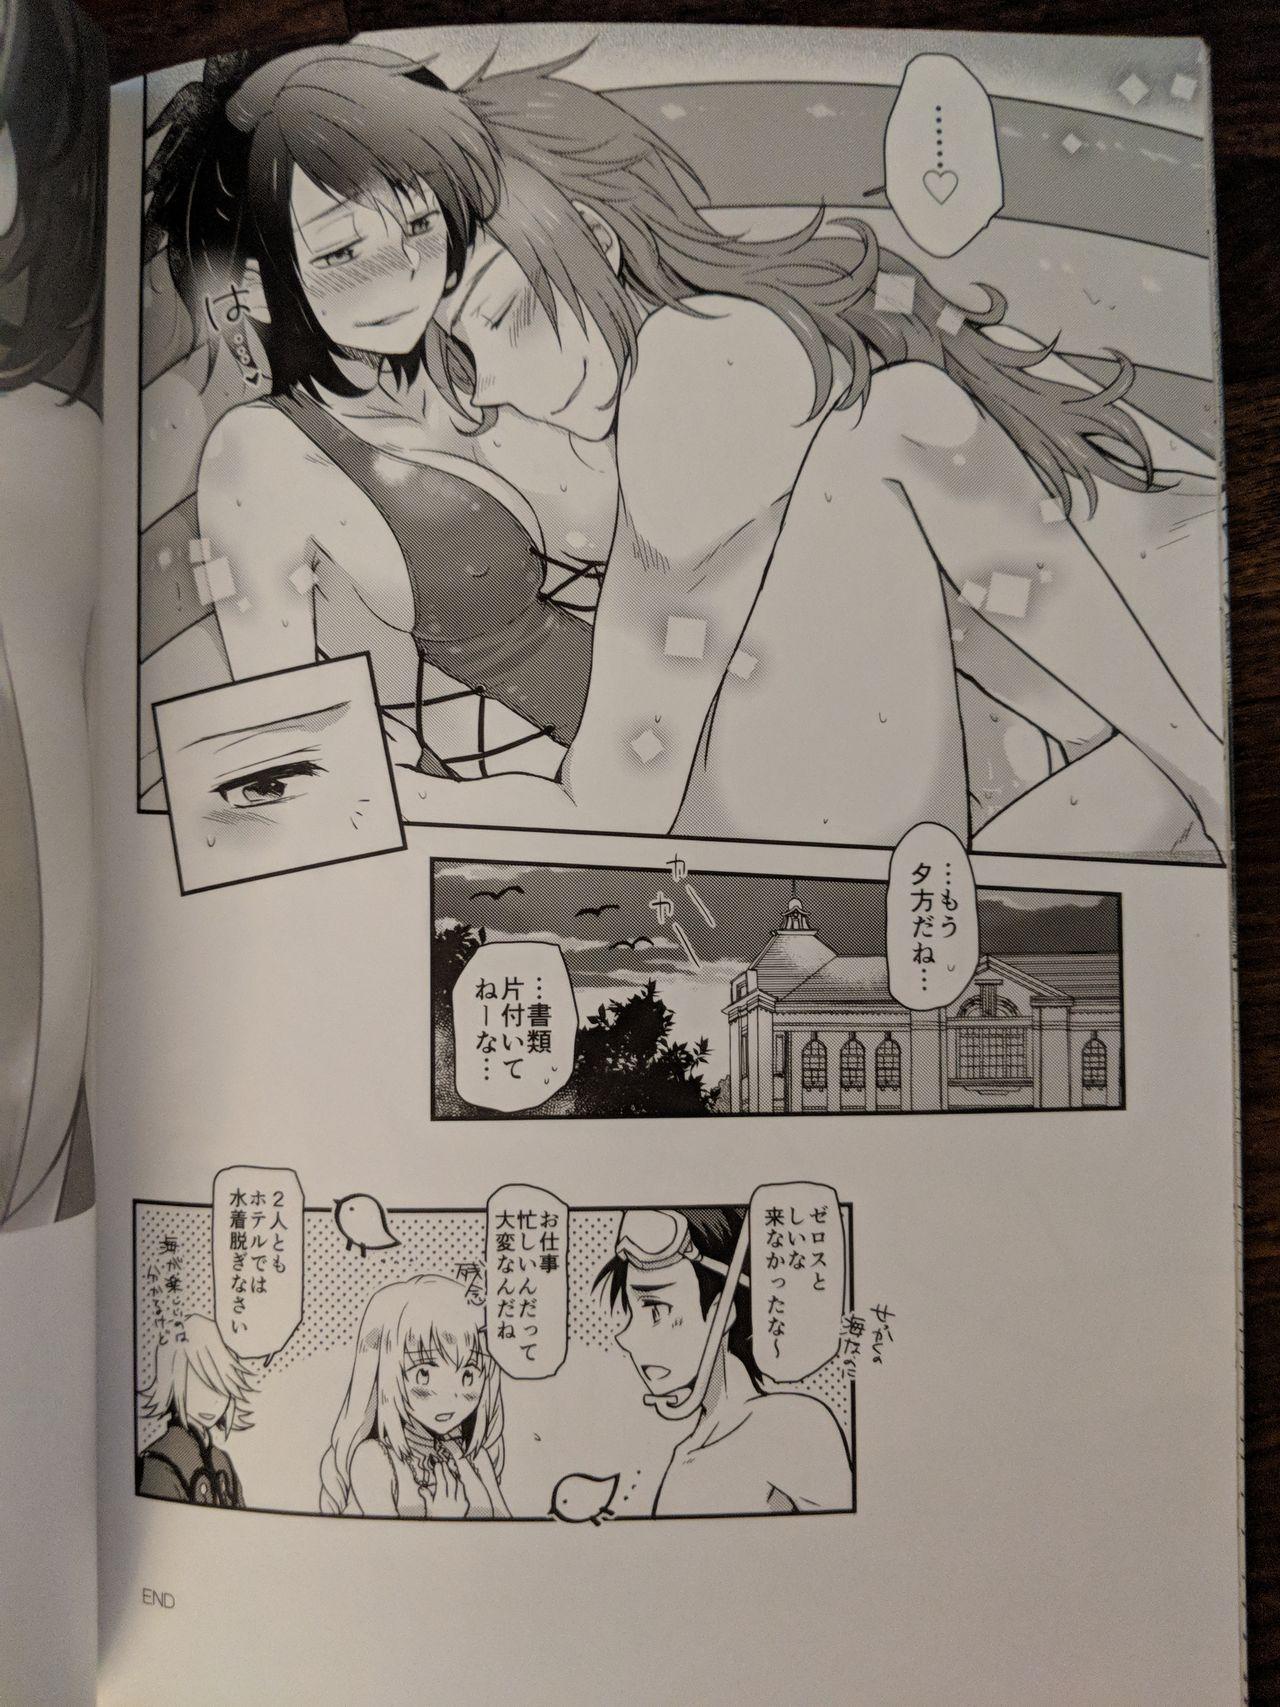 Load 彼女が水着にきがえたら - Tales of symphonia Behind - Page 25